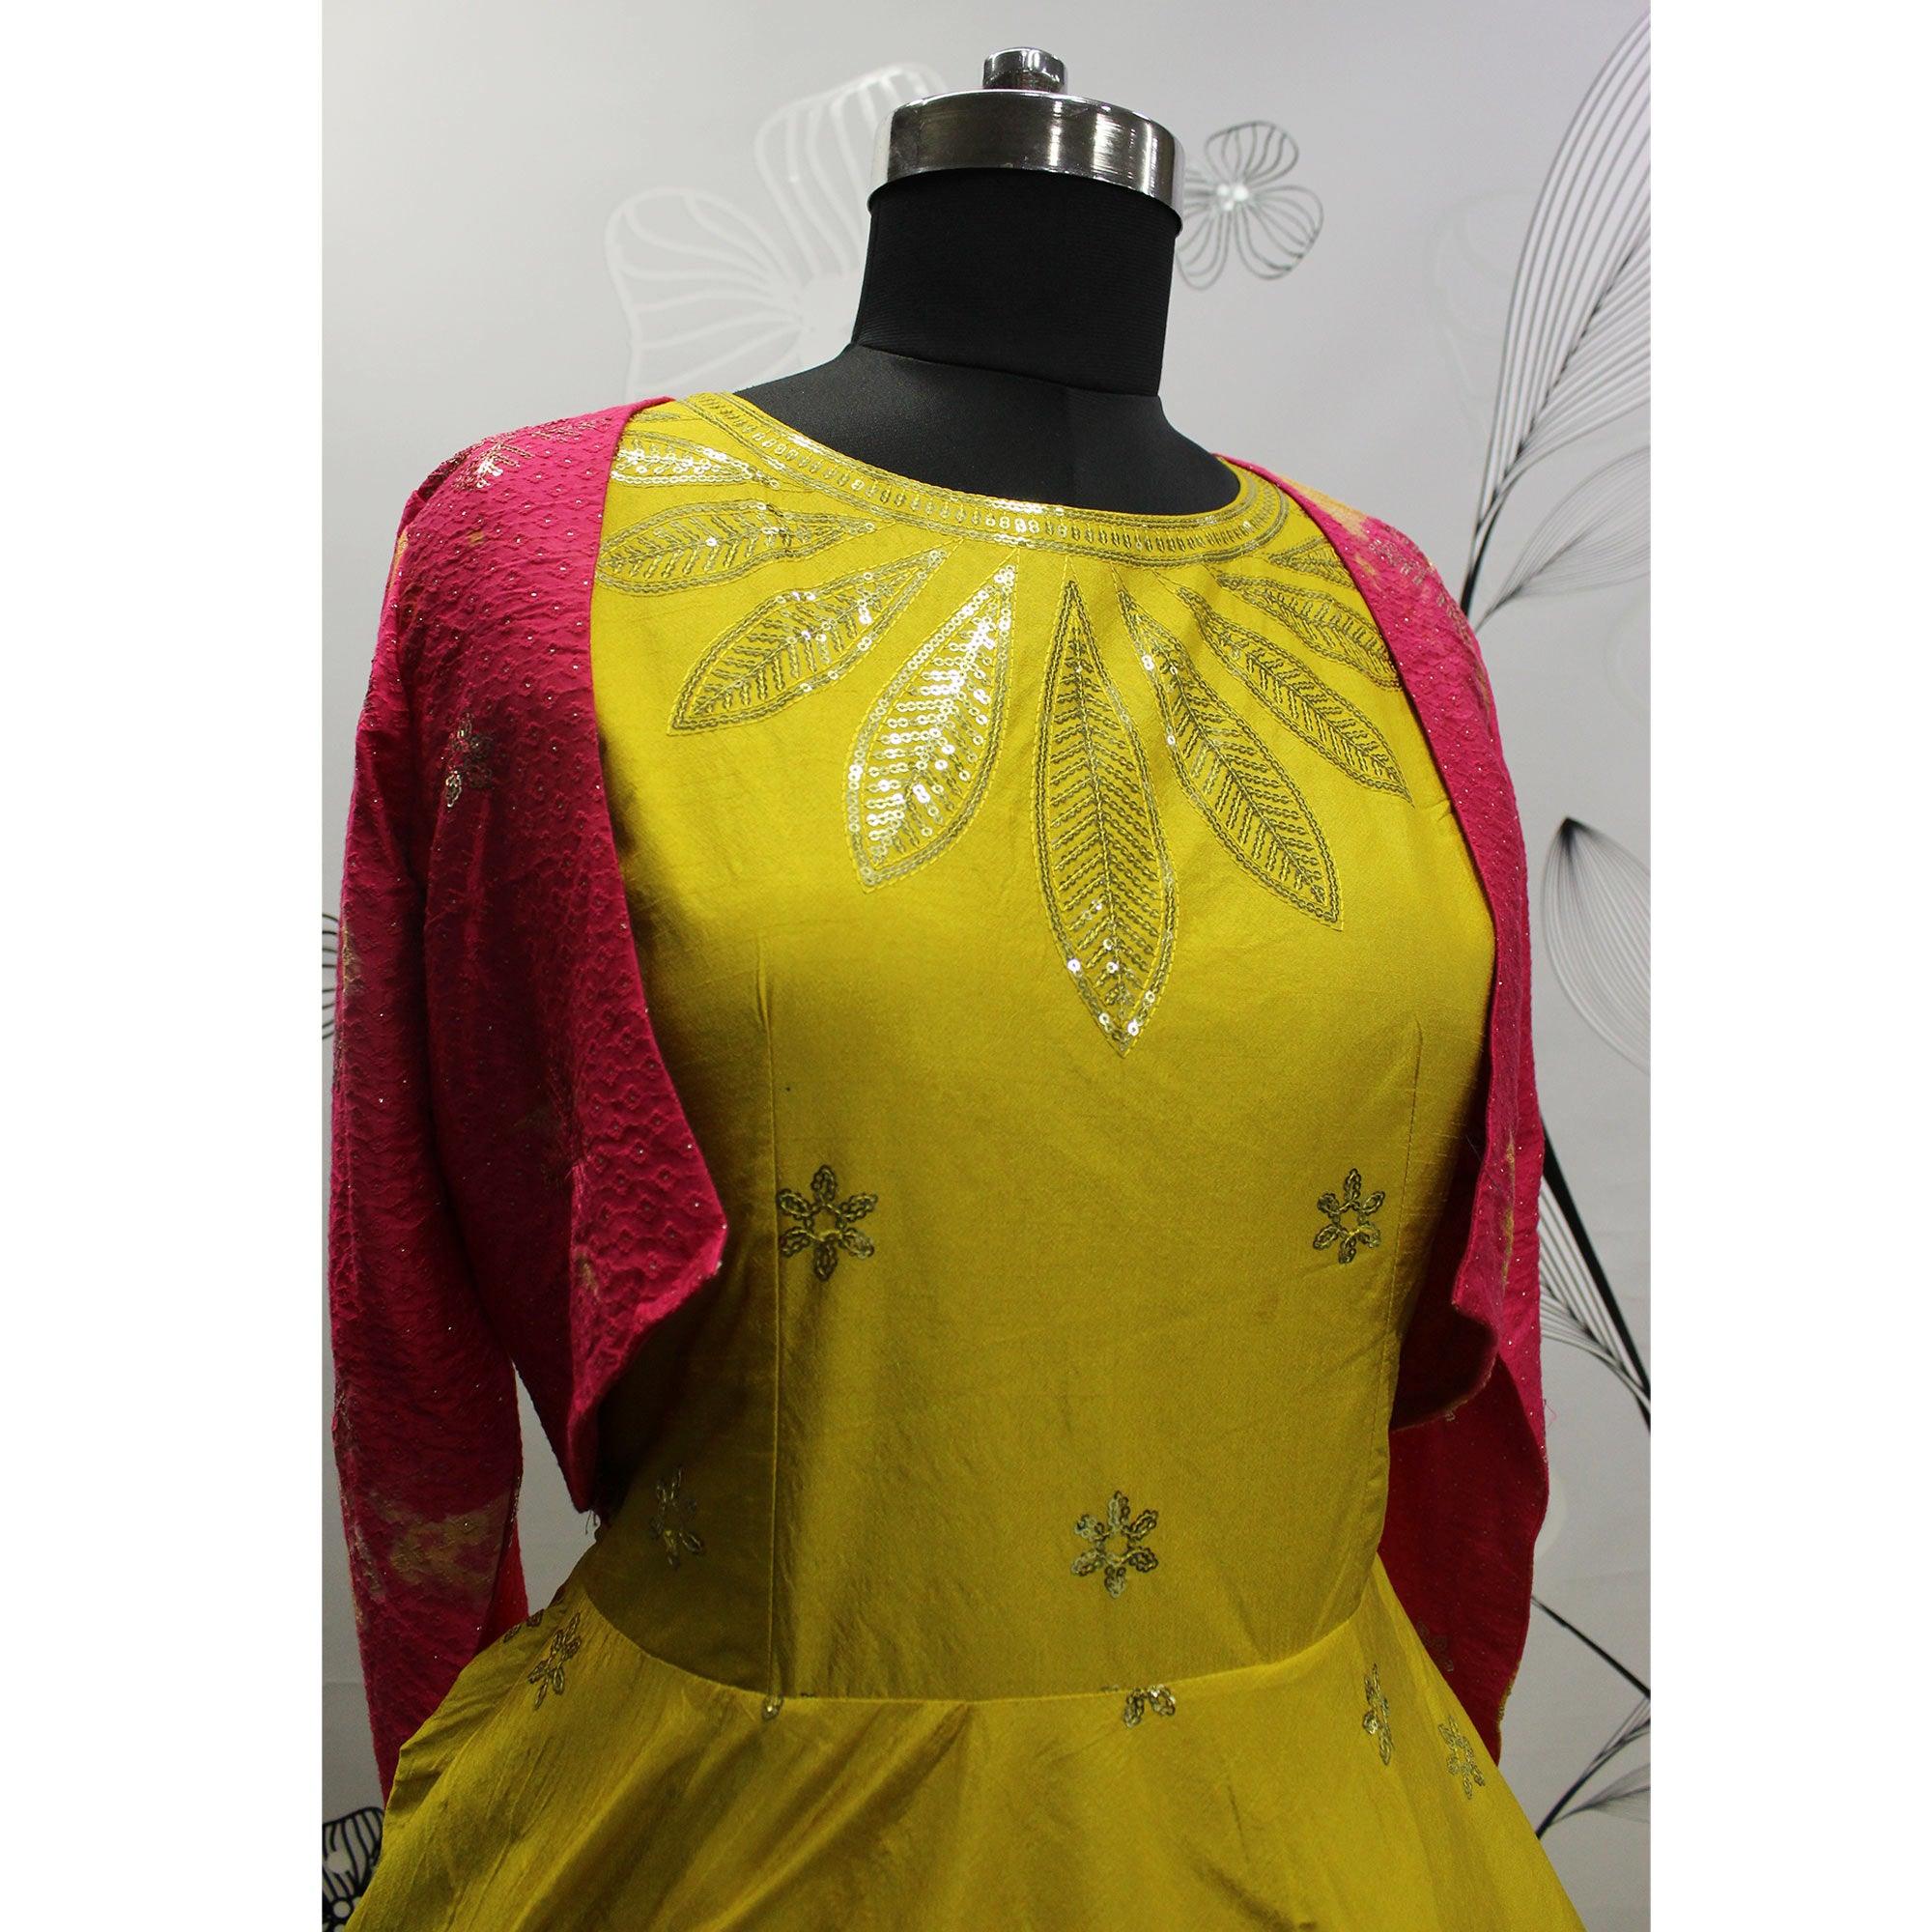 Lemon Green Sequence Embroidered Pure Cotton Gown With Koti - Peachmode